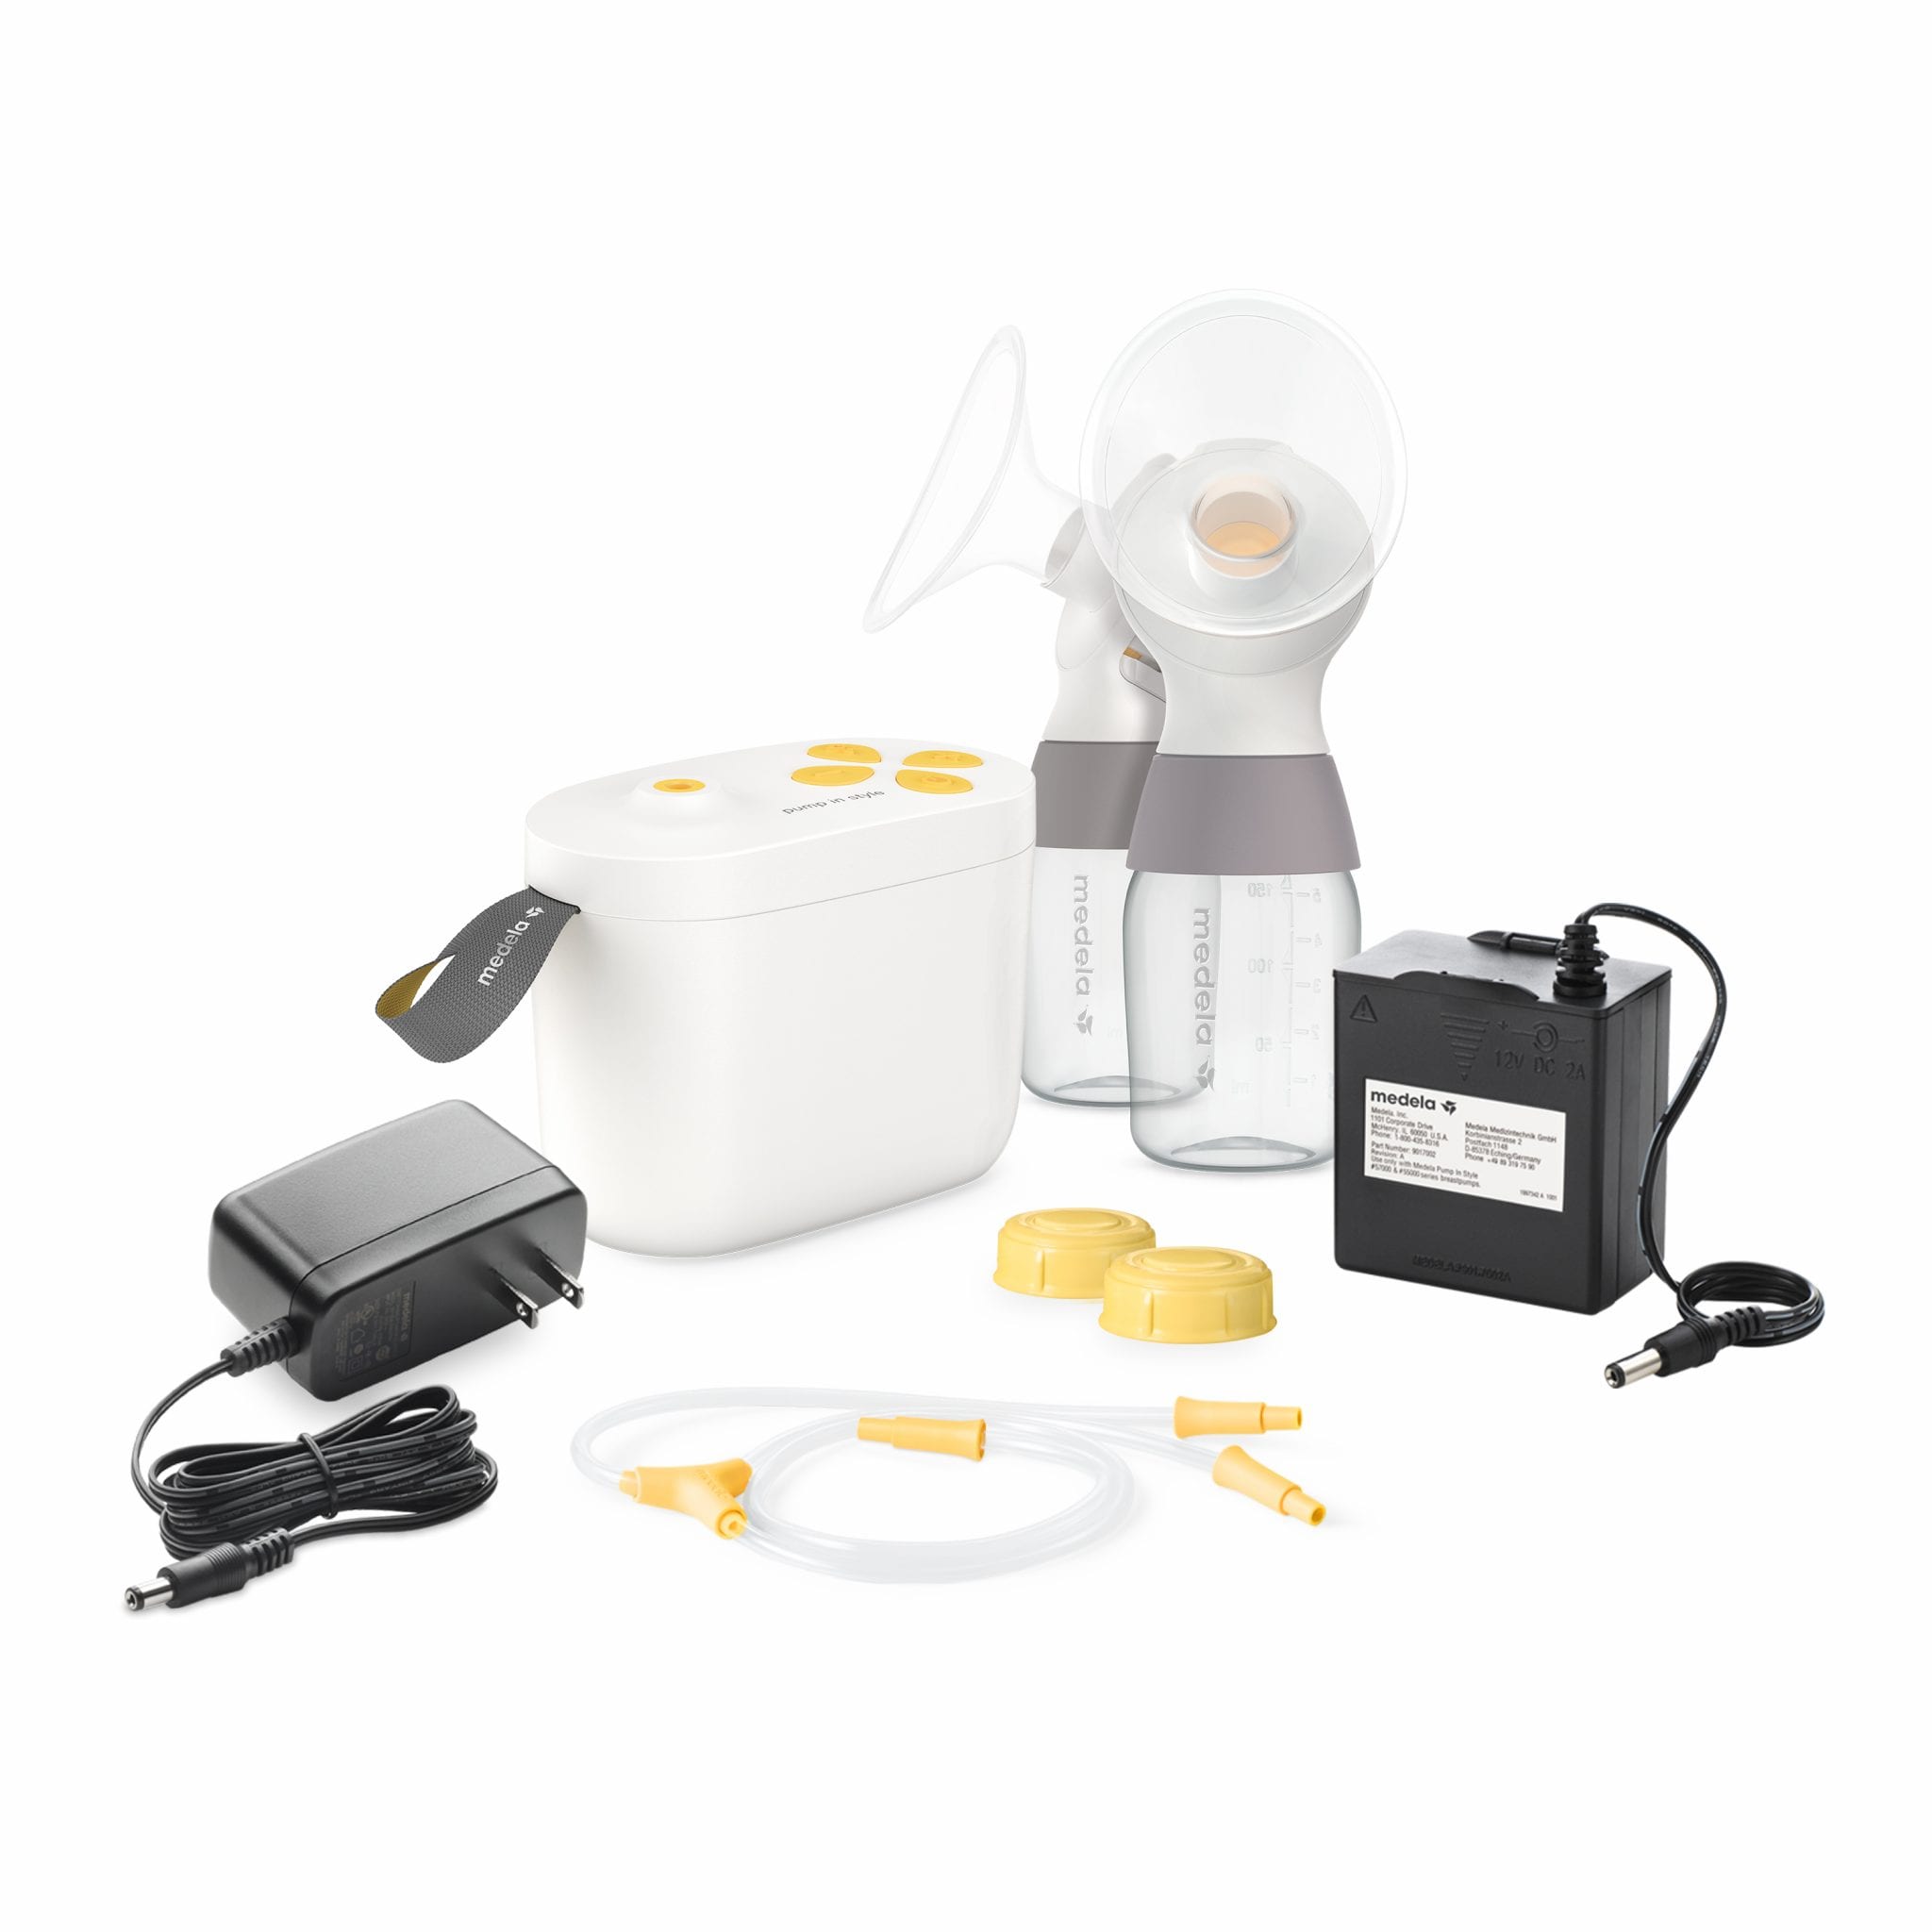 Medela Pump In Style with MaxFlow Technology - BreastPumps.com